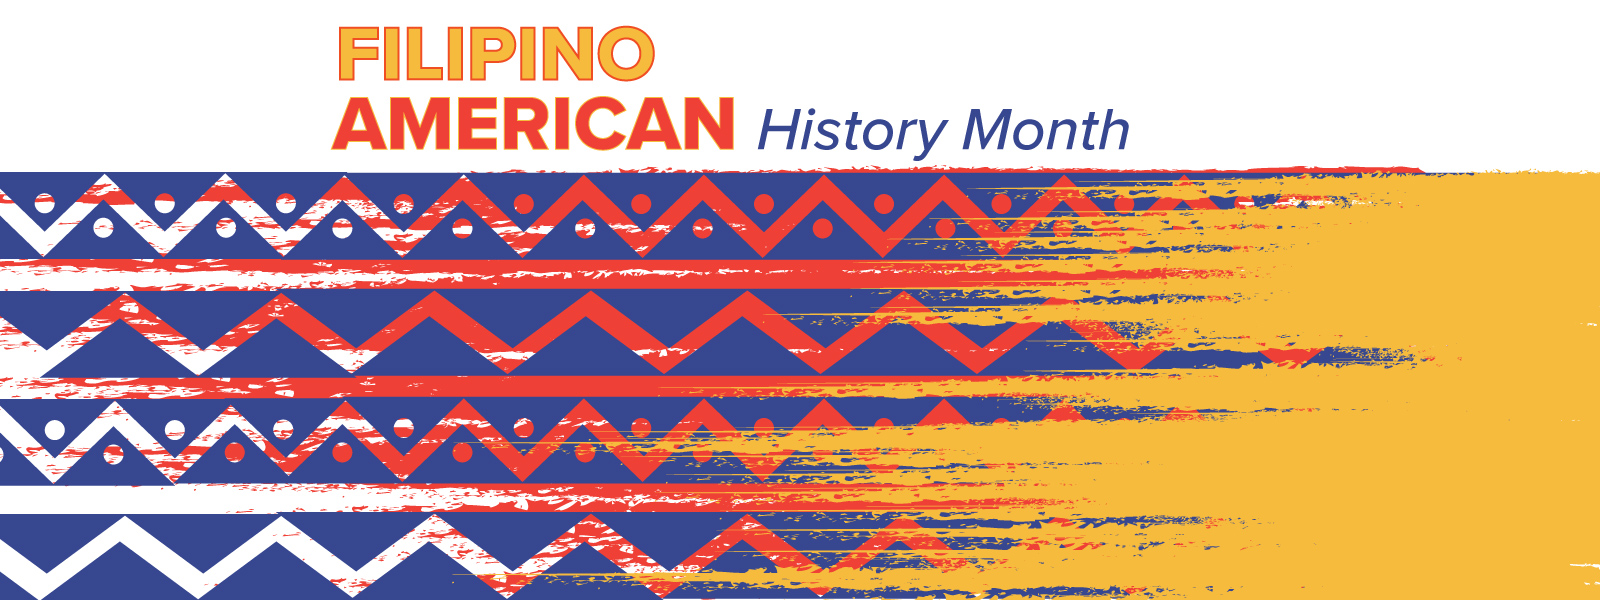 Filipino American History Month Q&A with Marc Guerrero